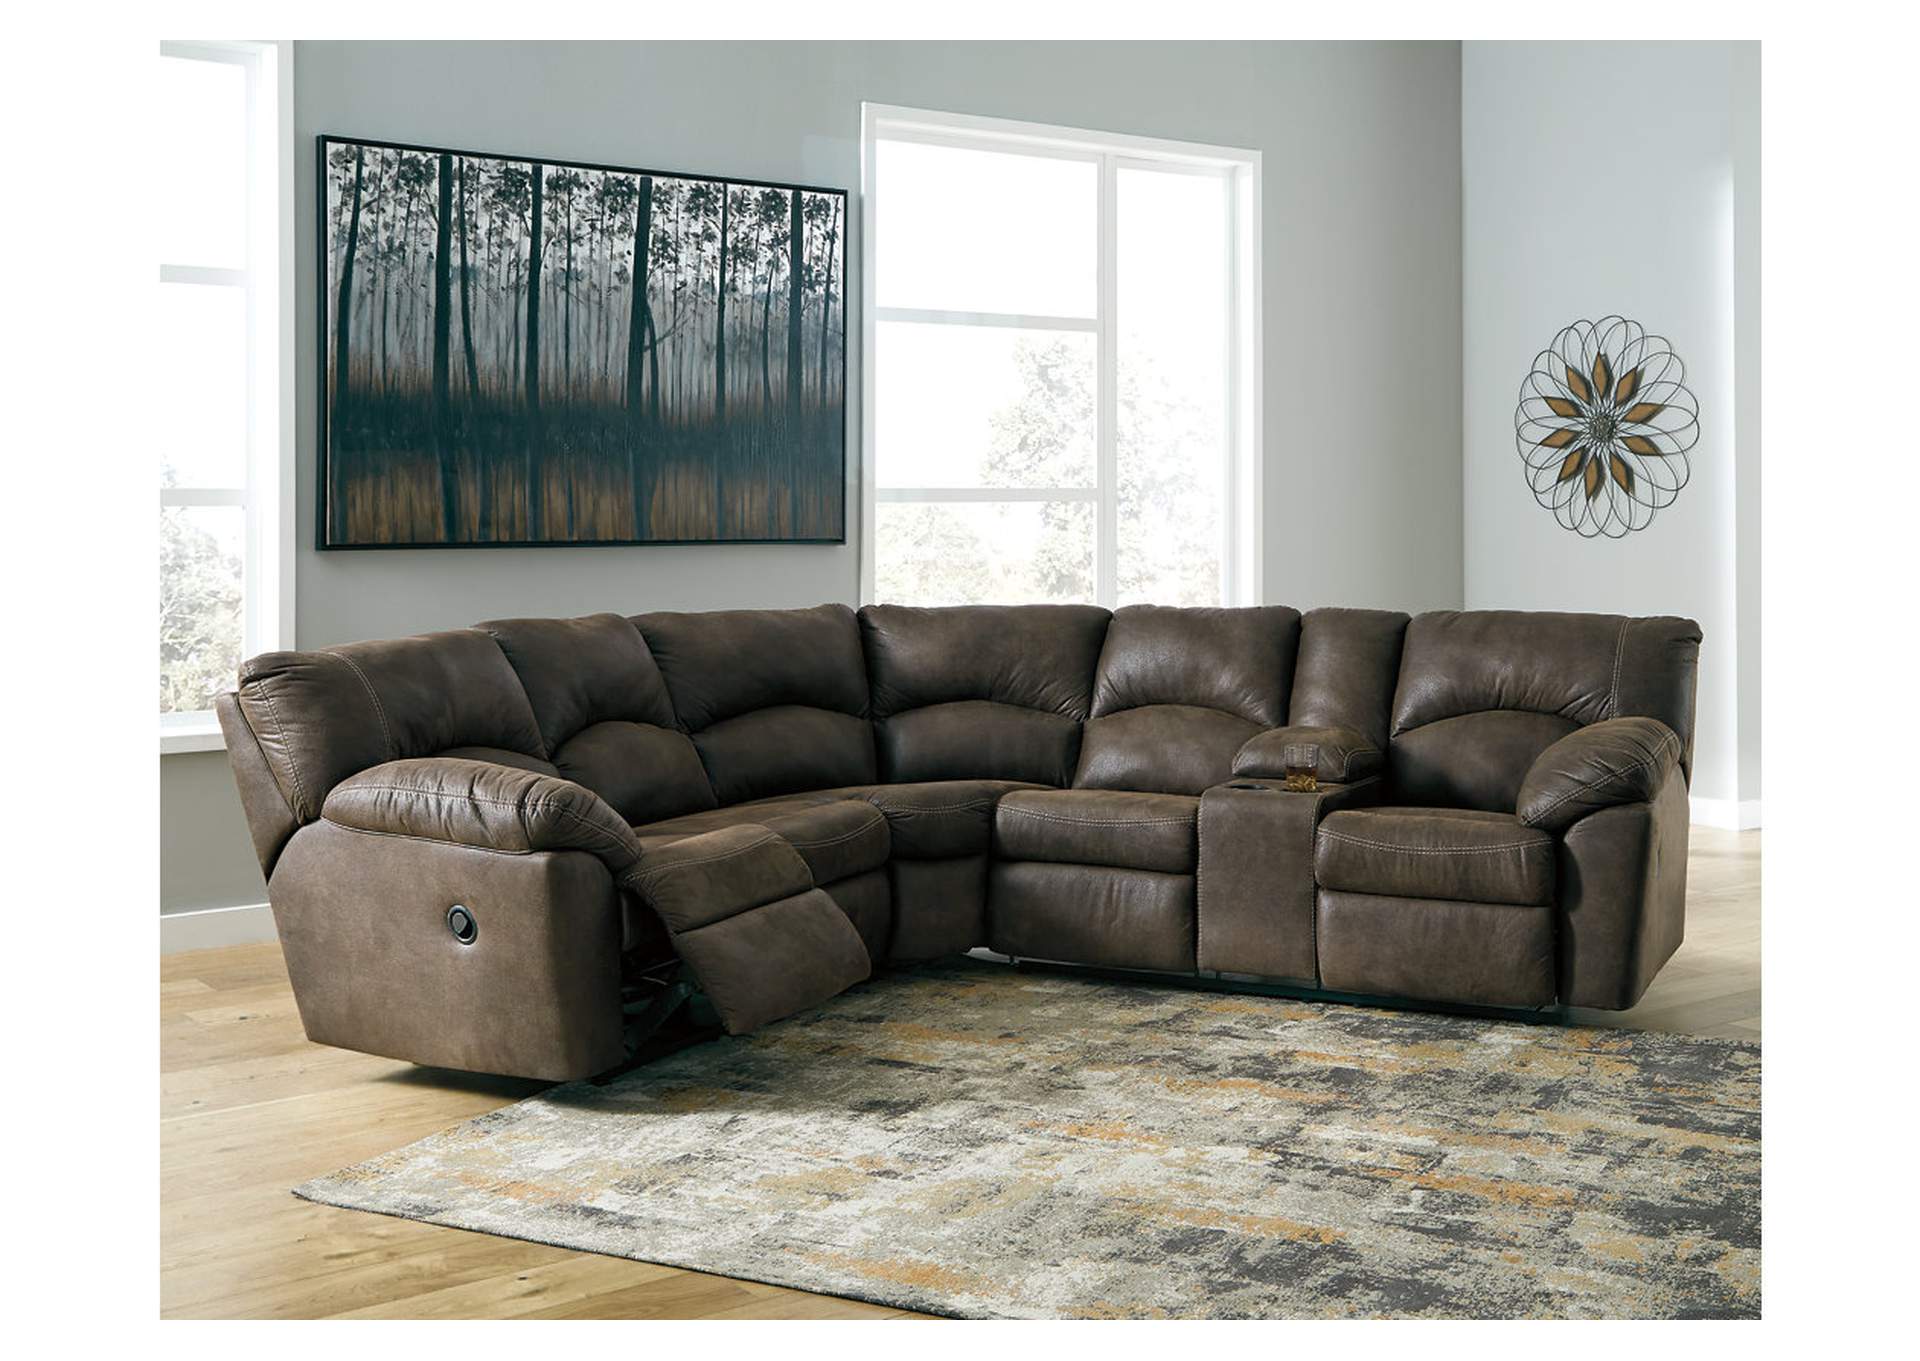 Tambo 2-Piece Reclining Sectional,Signature Design By Ashley